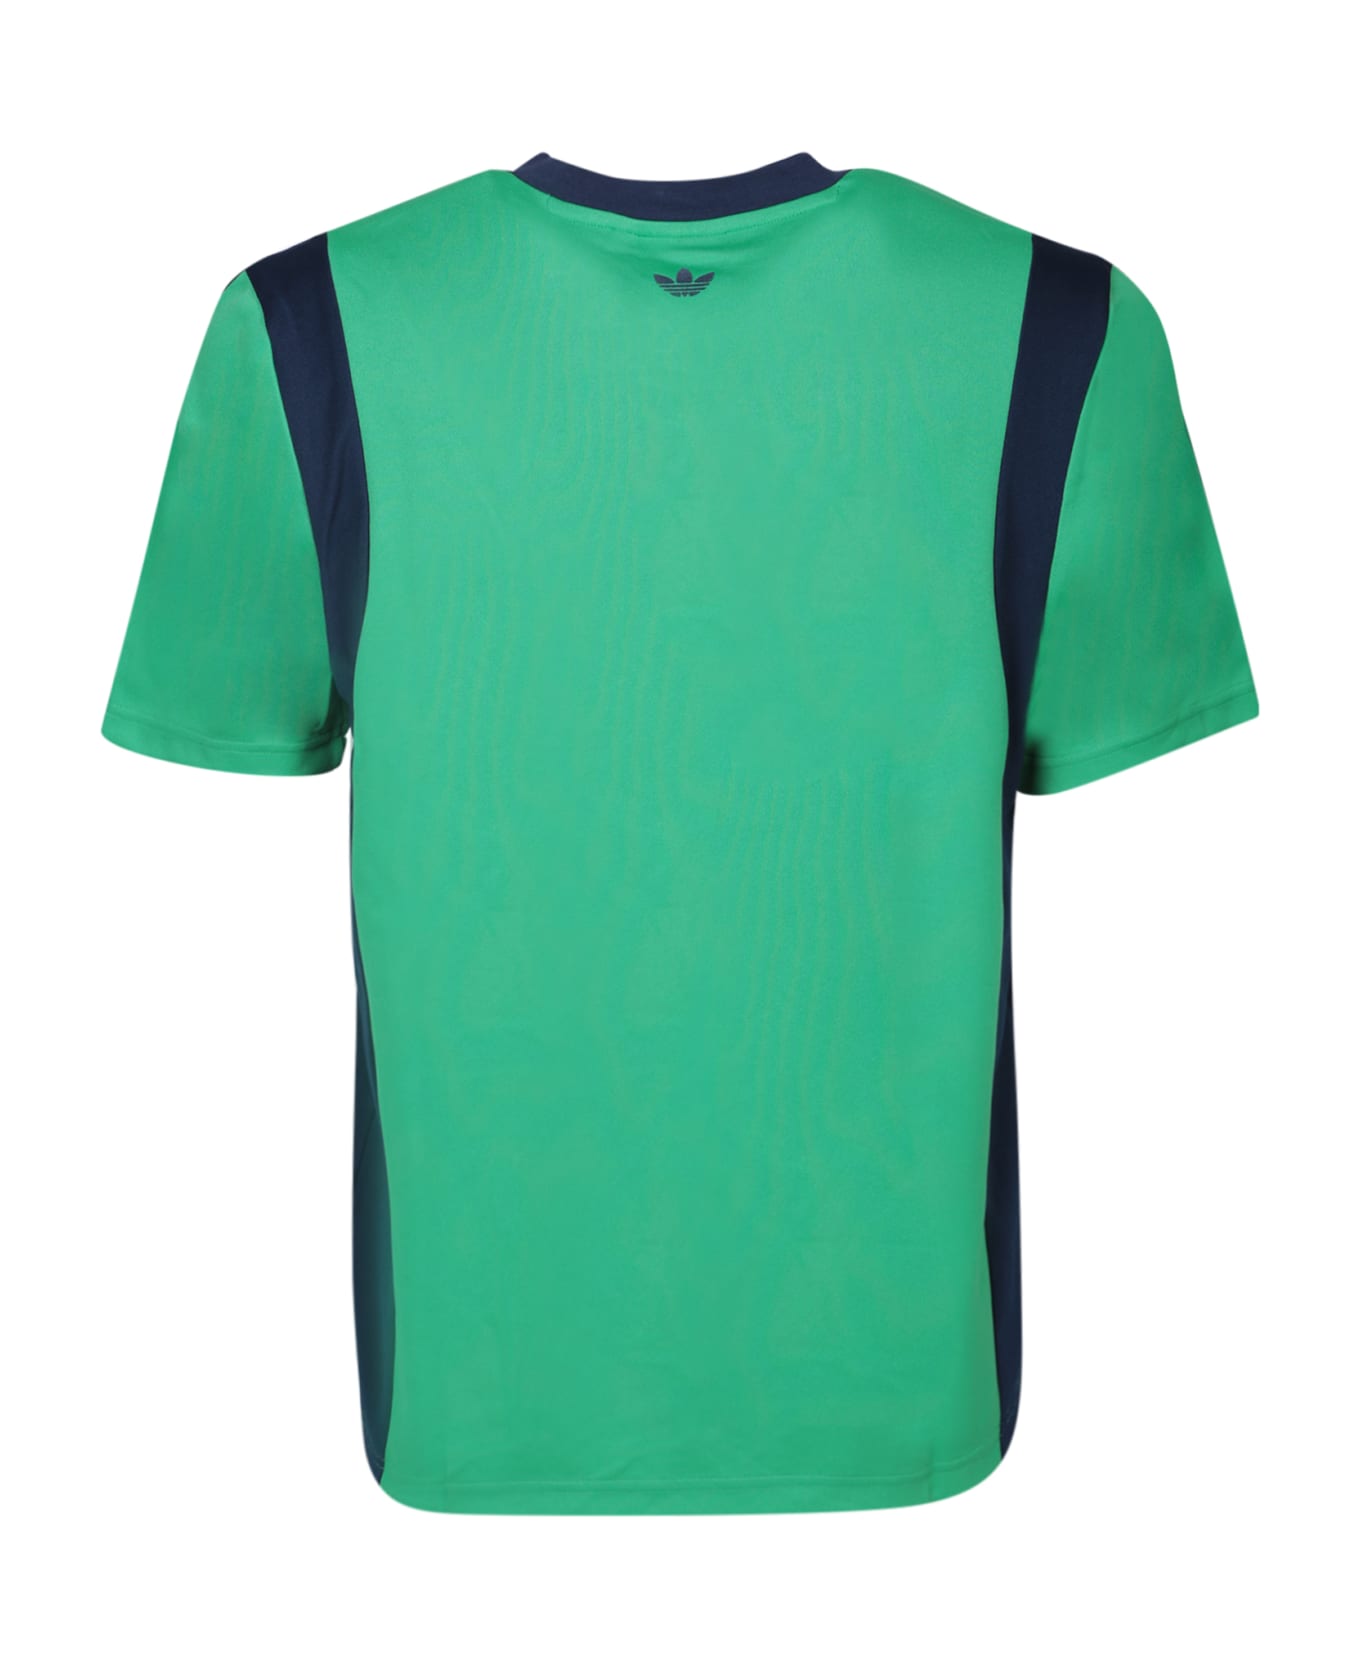 Y-3 Striped Details Green T-shirt - Green